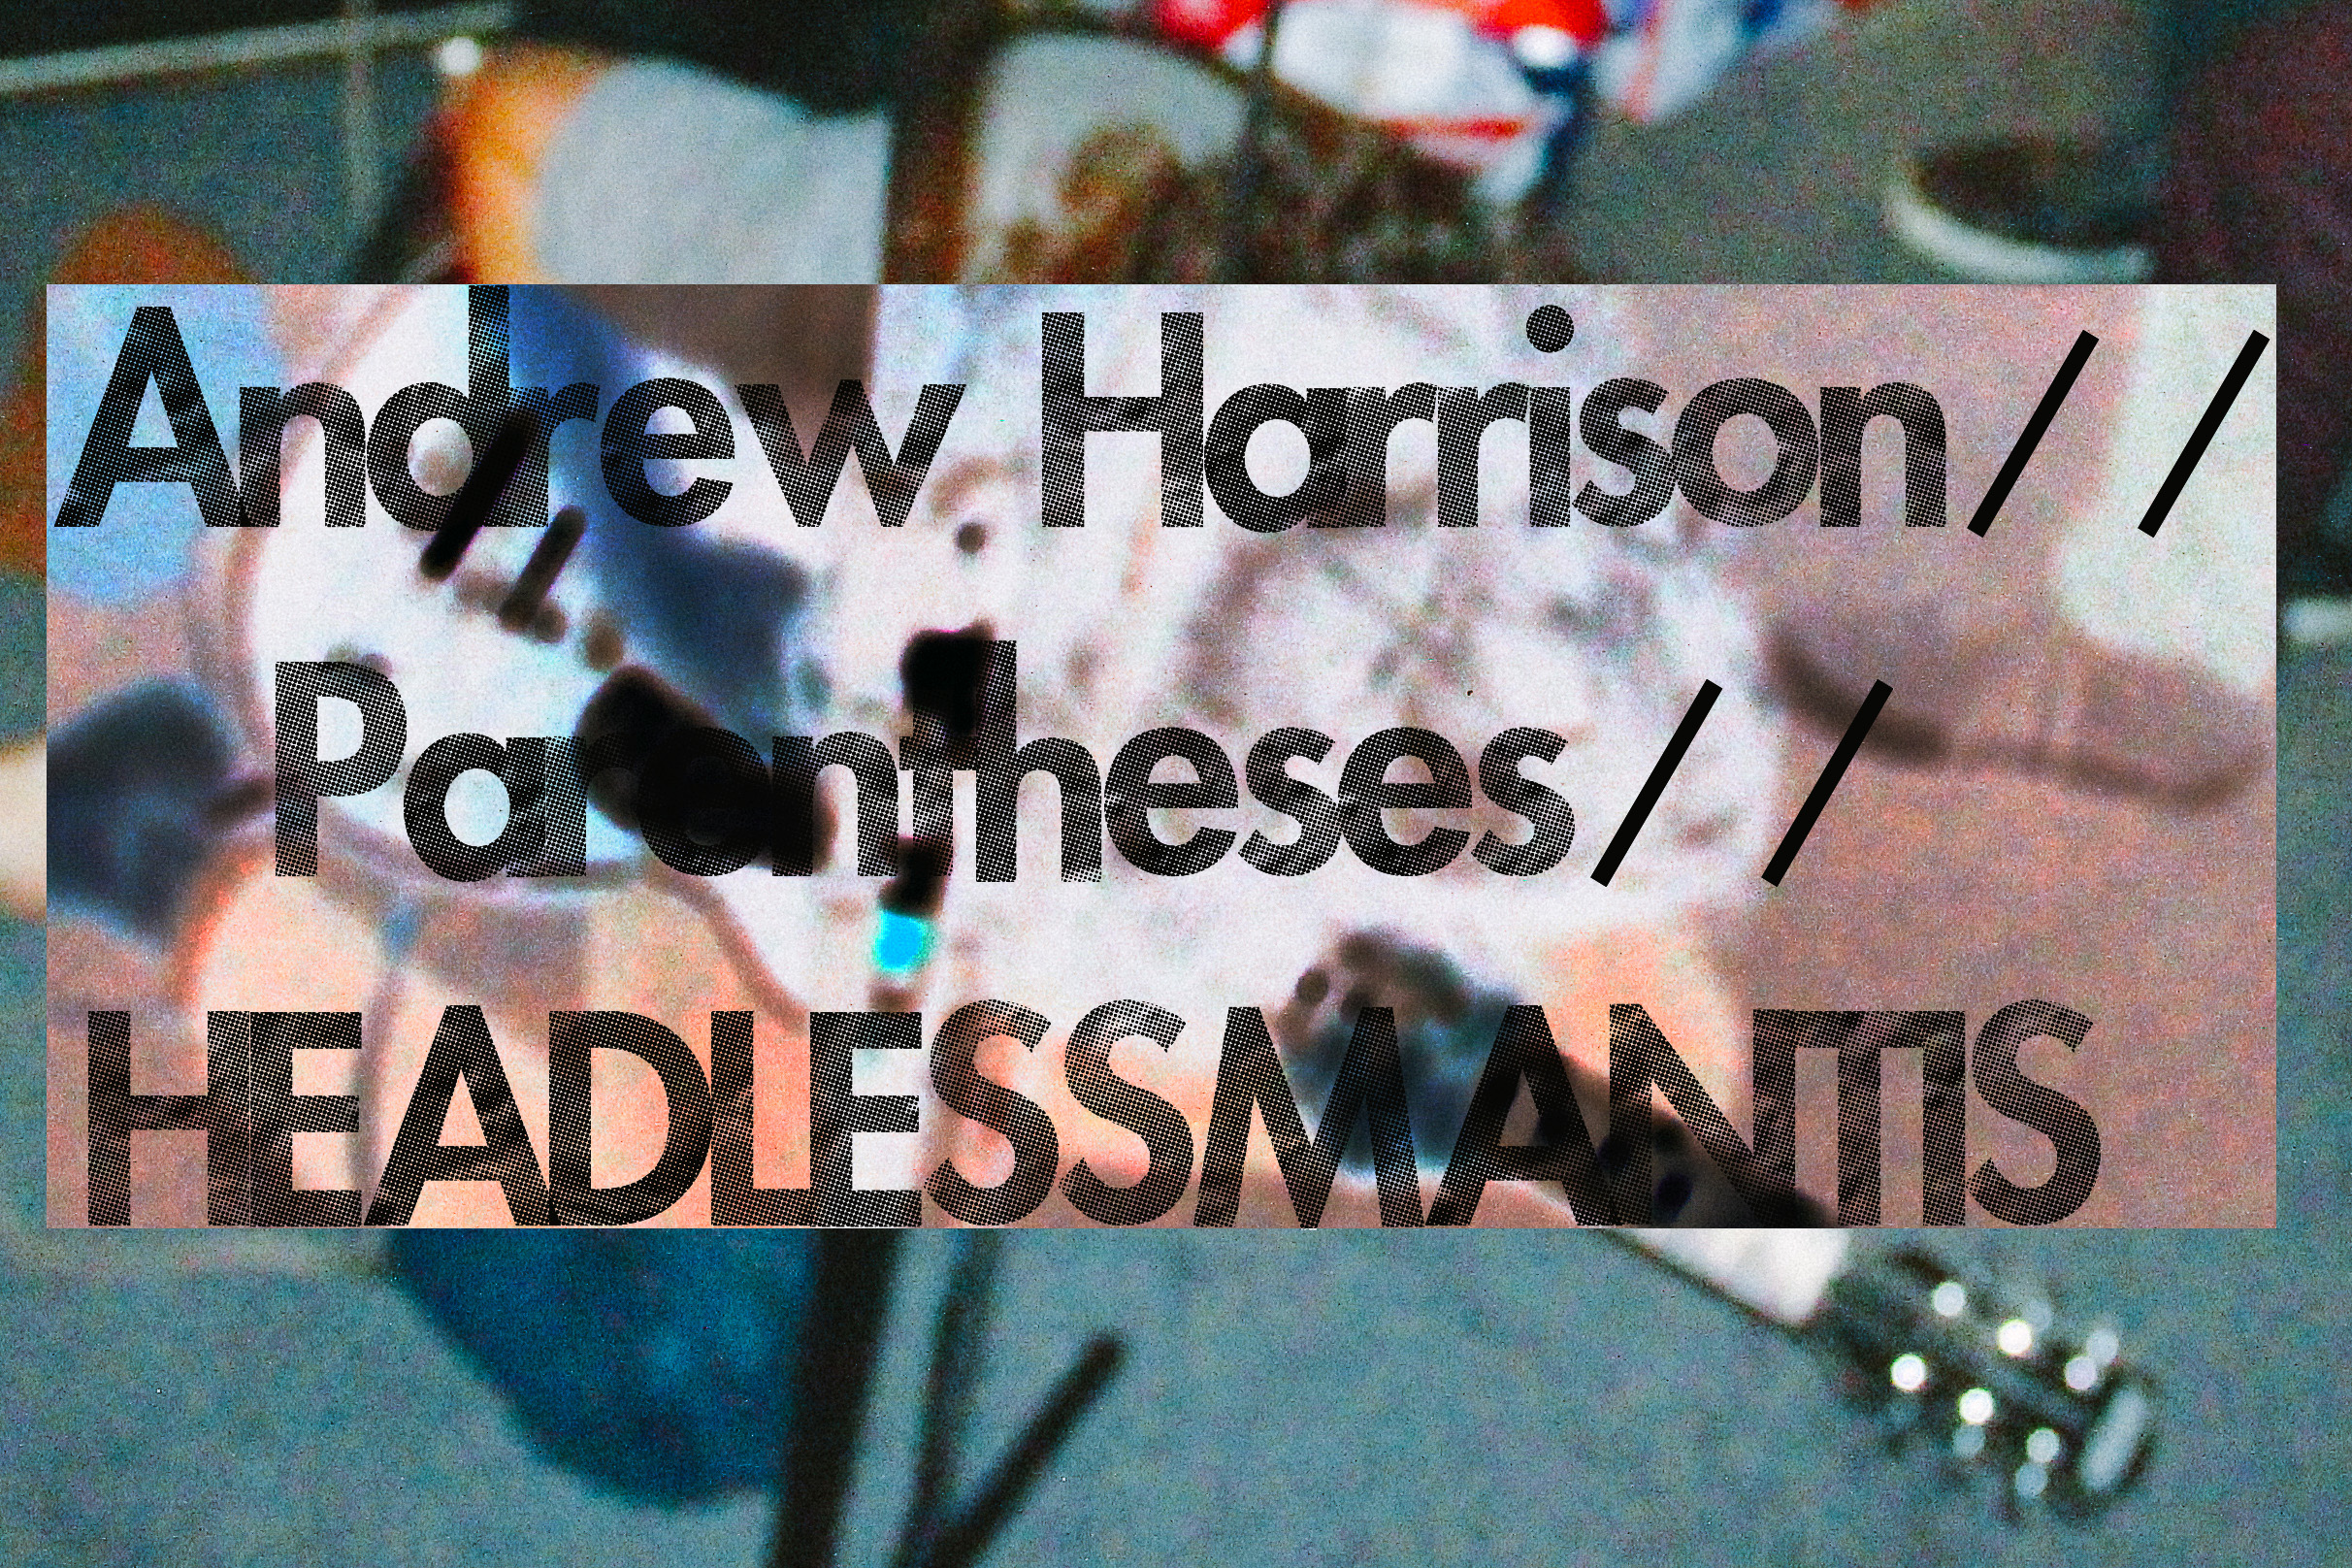 HEADLESSMANTIS, Andrew Harrison, and Parentheses at The Compound